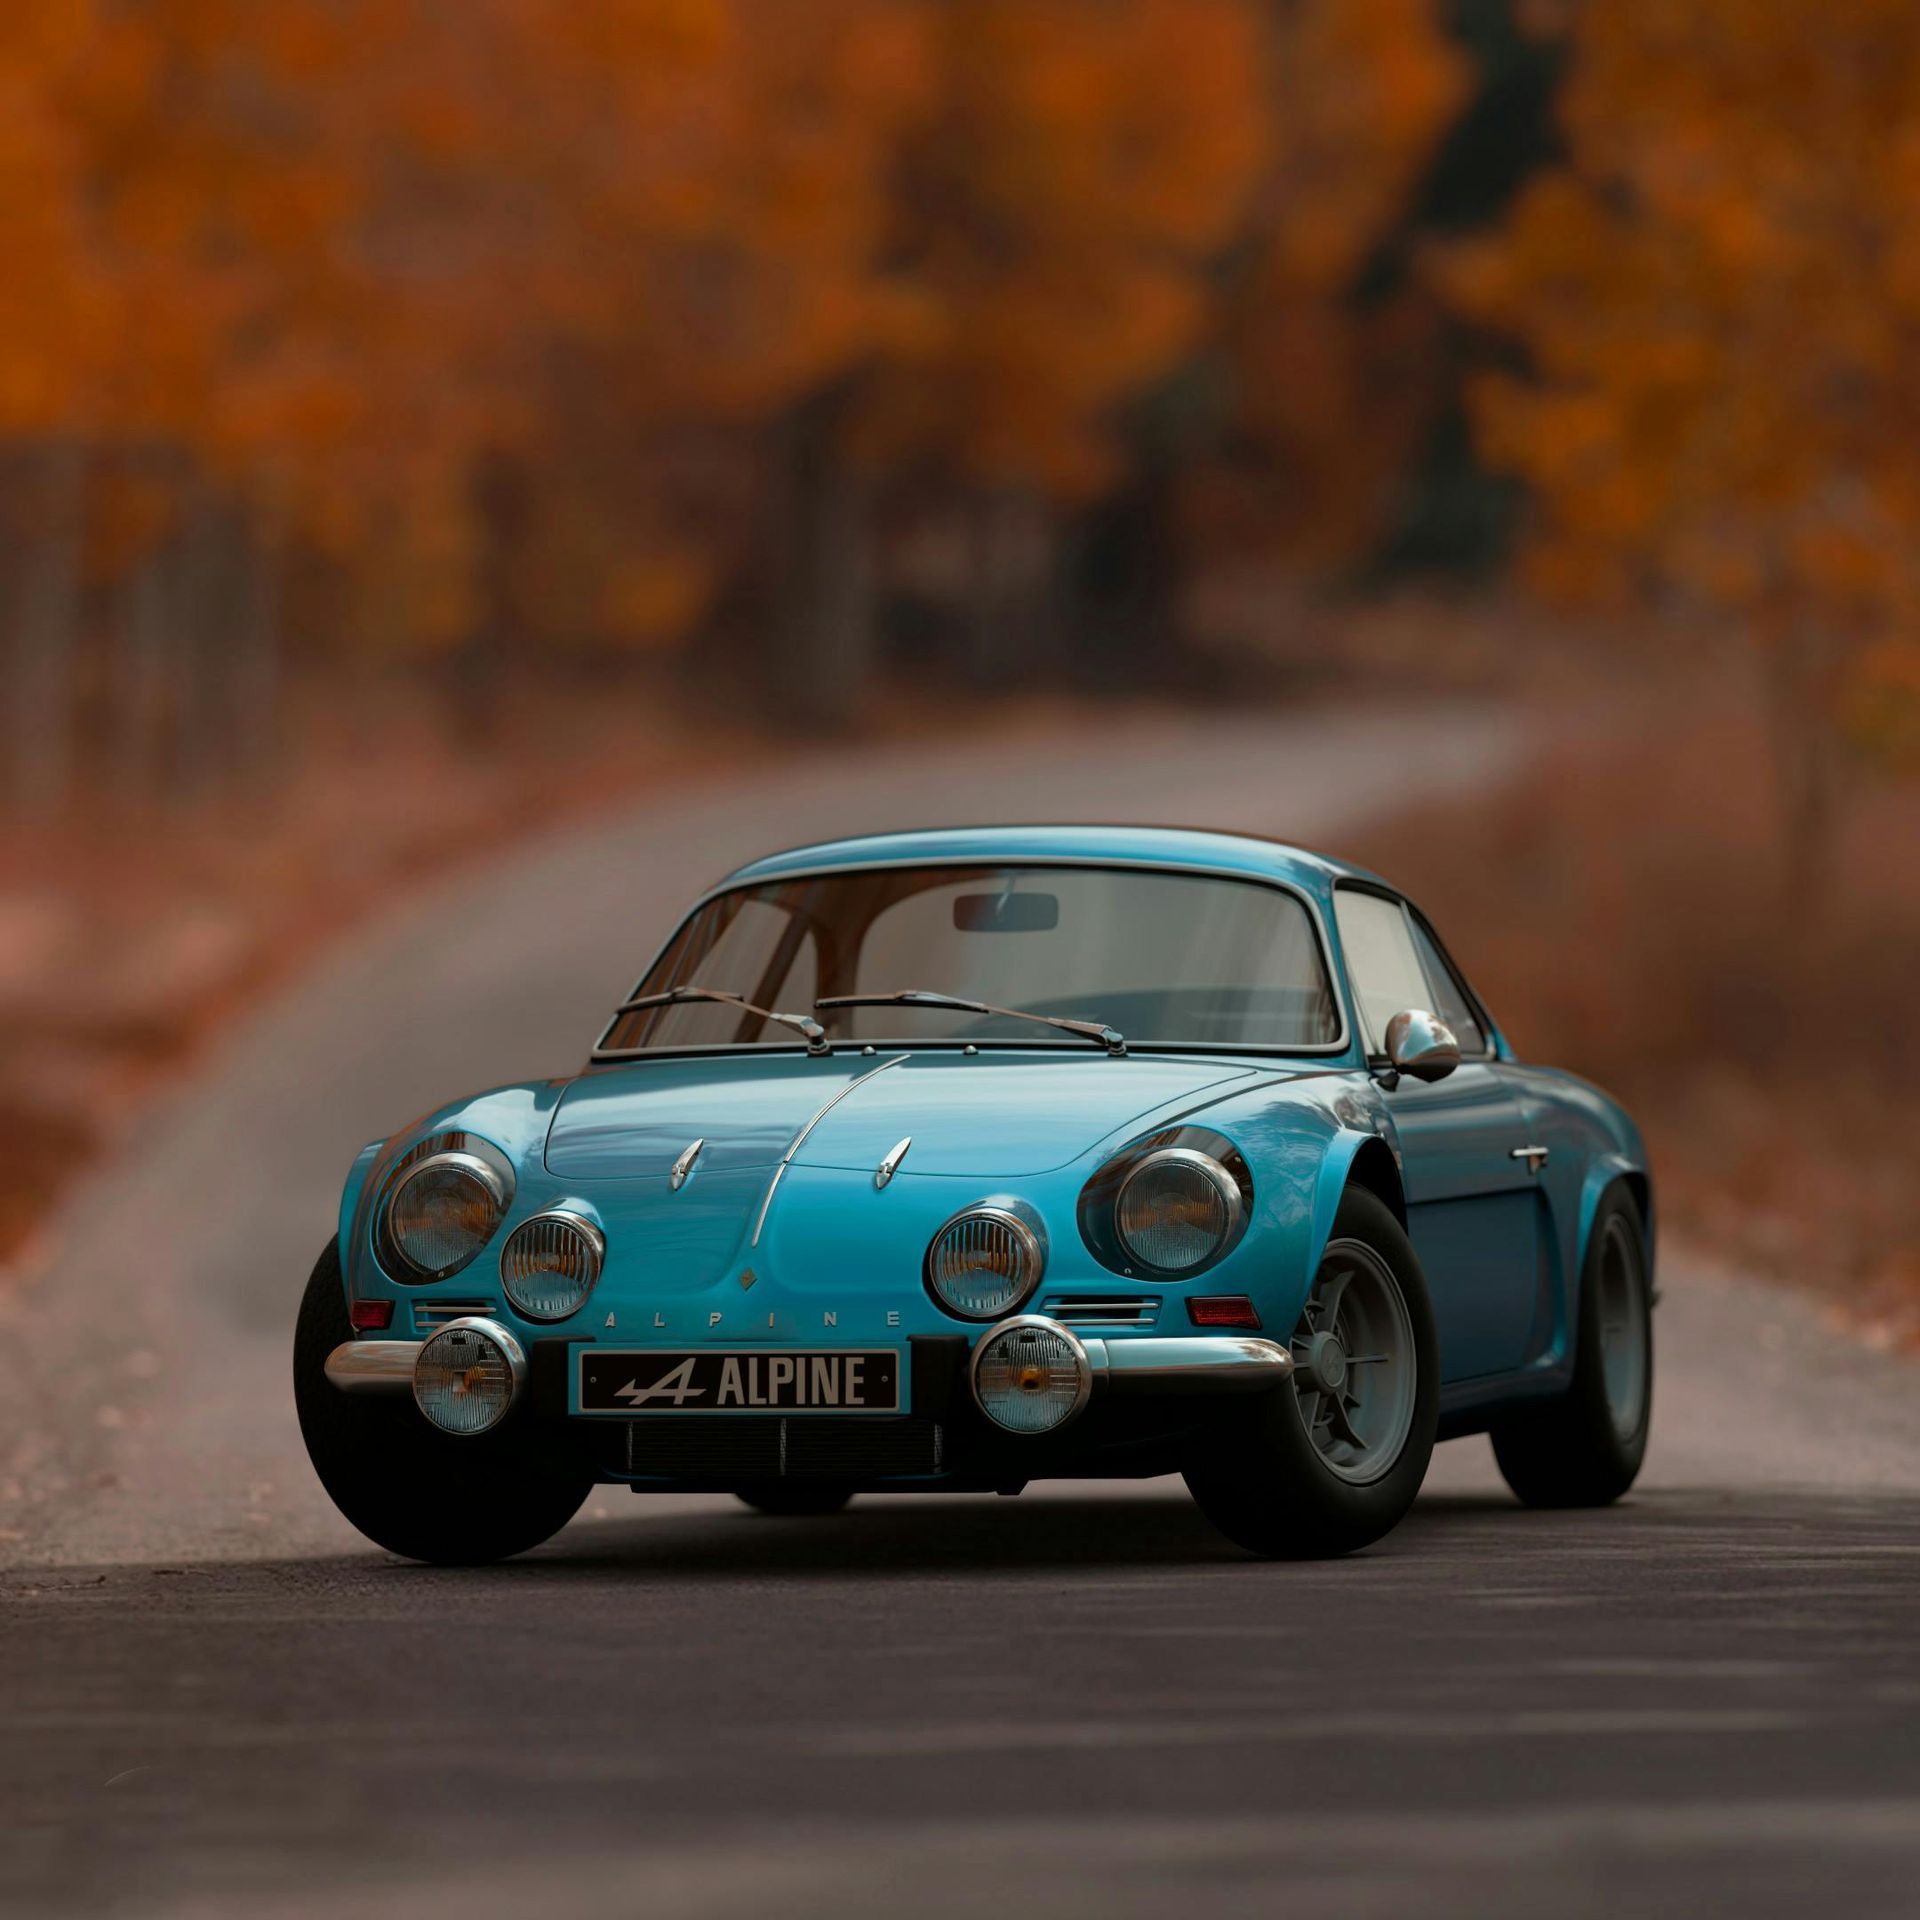 A blue alpine car is driving down a country road.